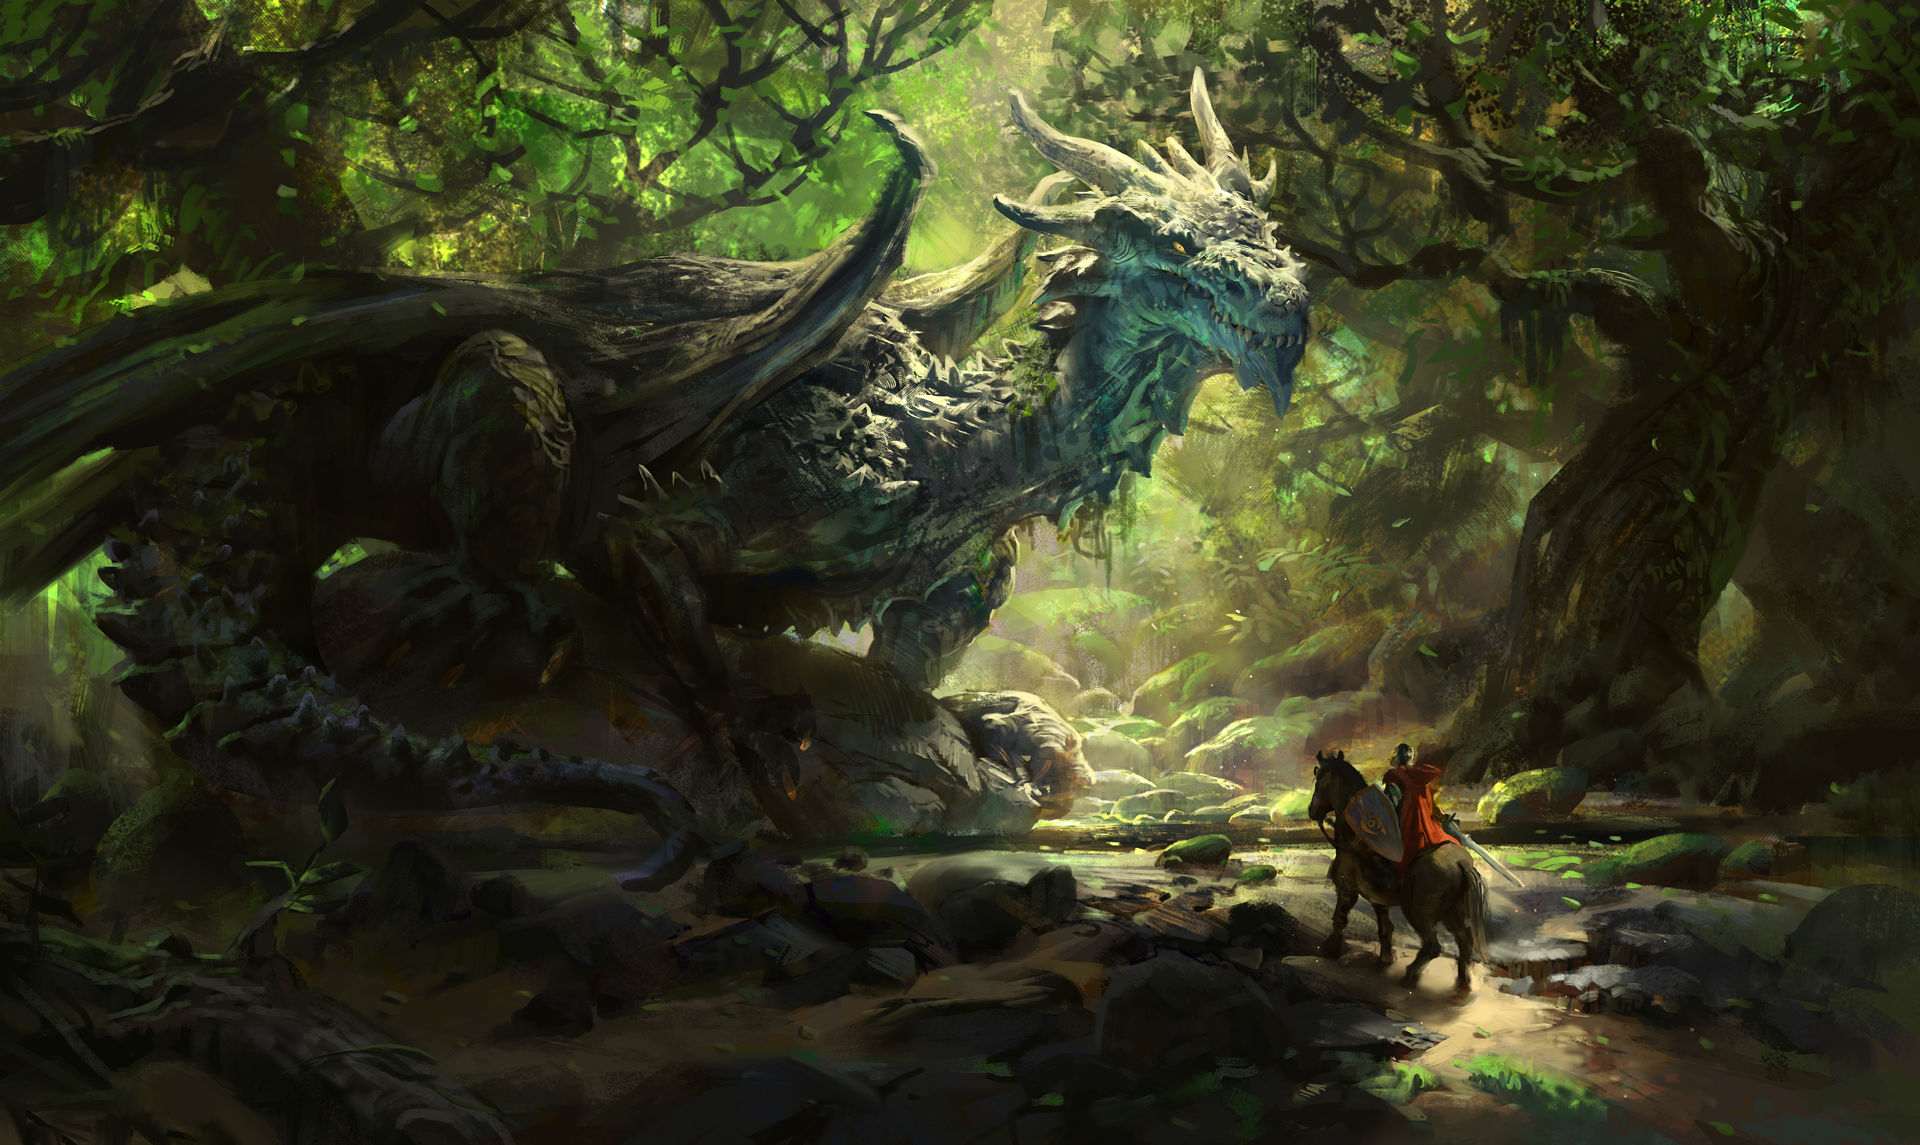 joseph__the_ancient__forest_dragon_by_mikeazevedo-d7jlys8.png